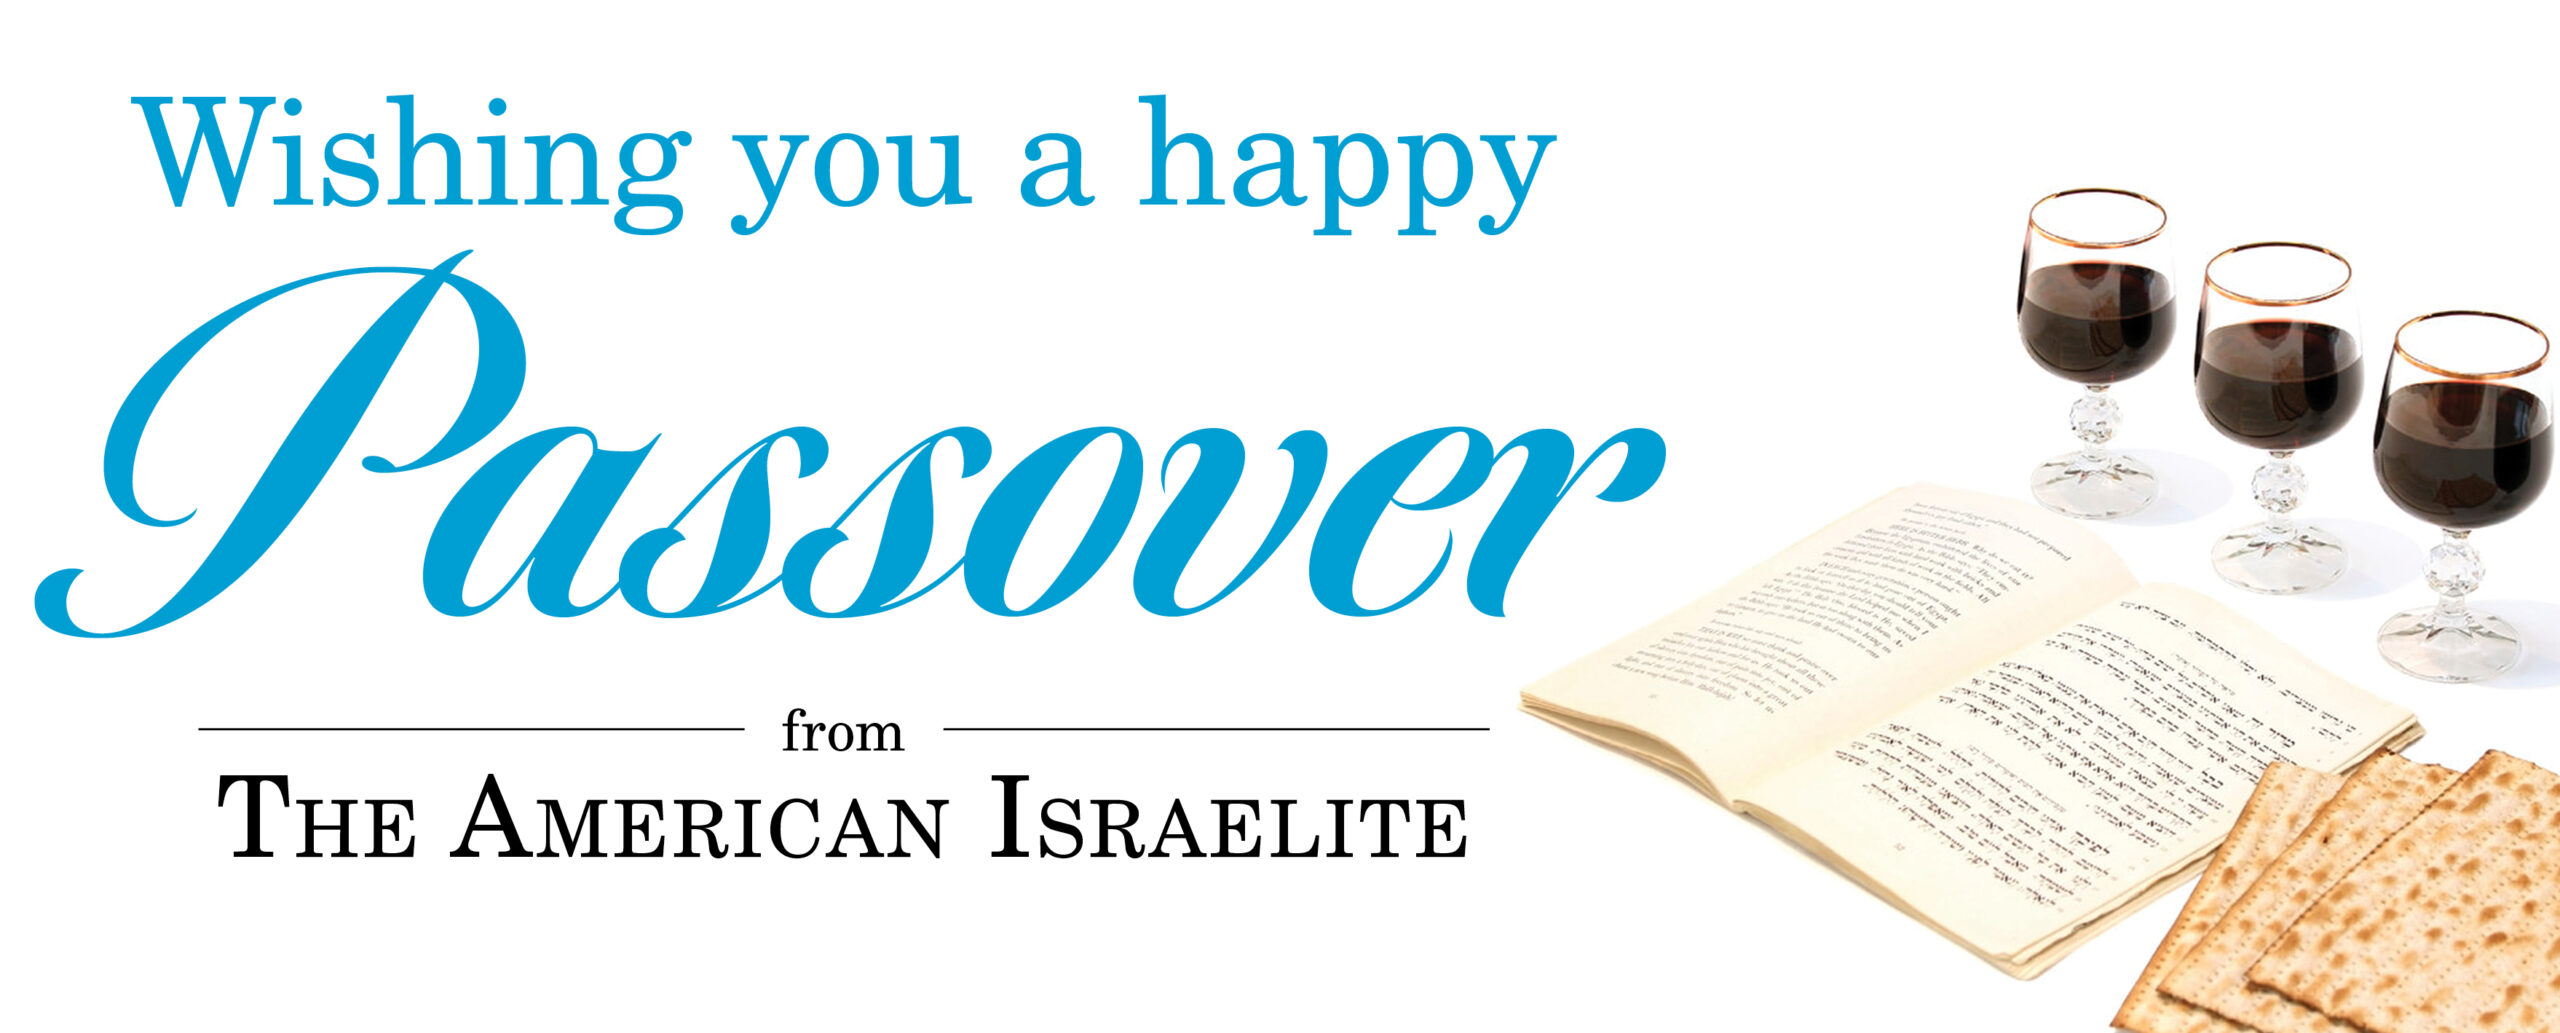 Happy Passover from The American Israelite